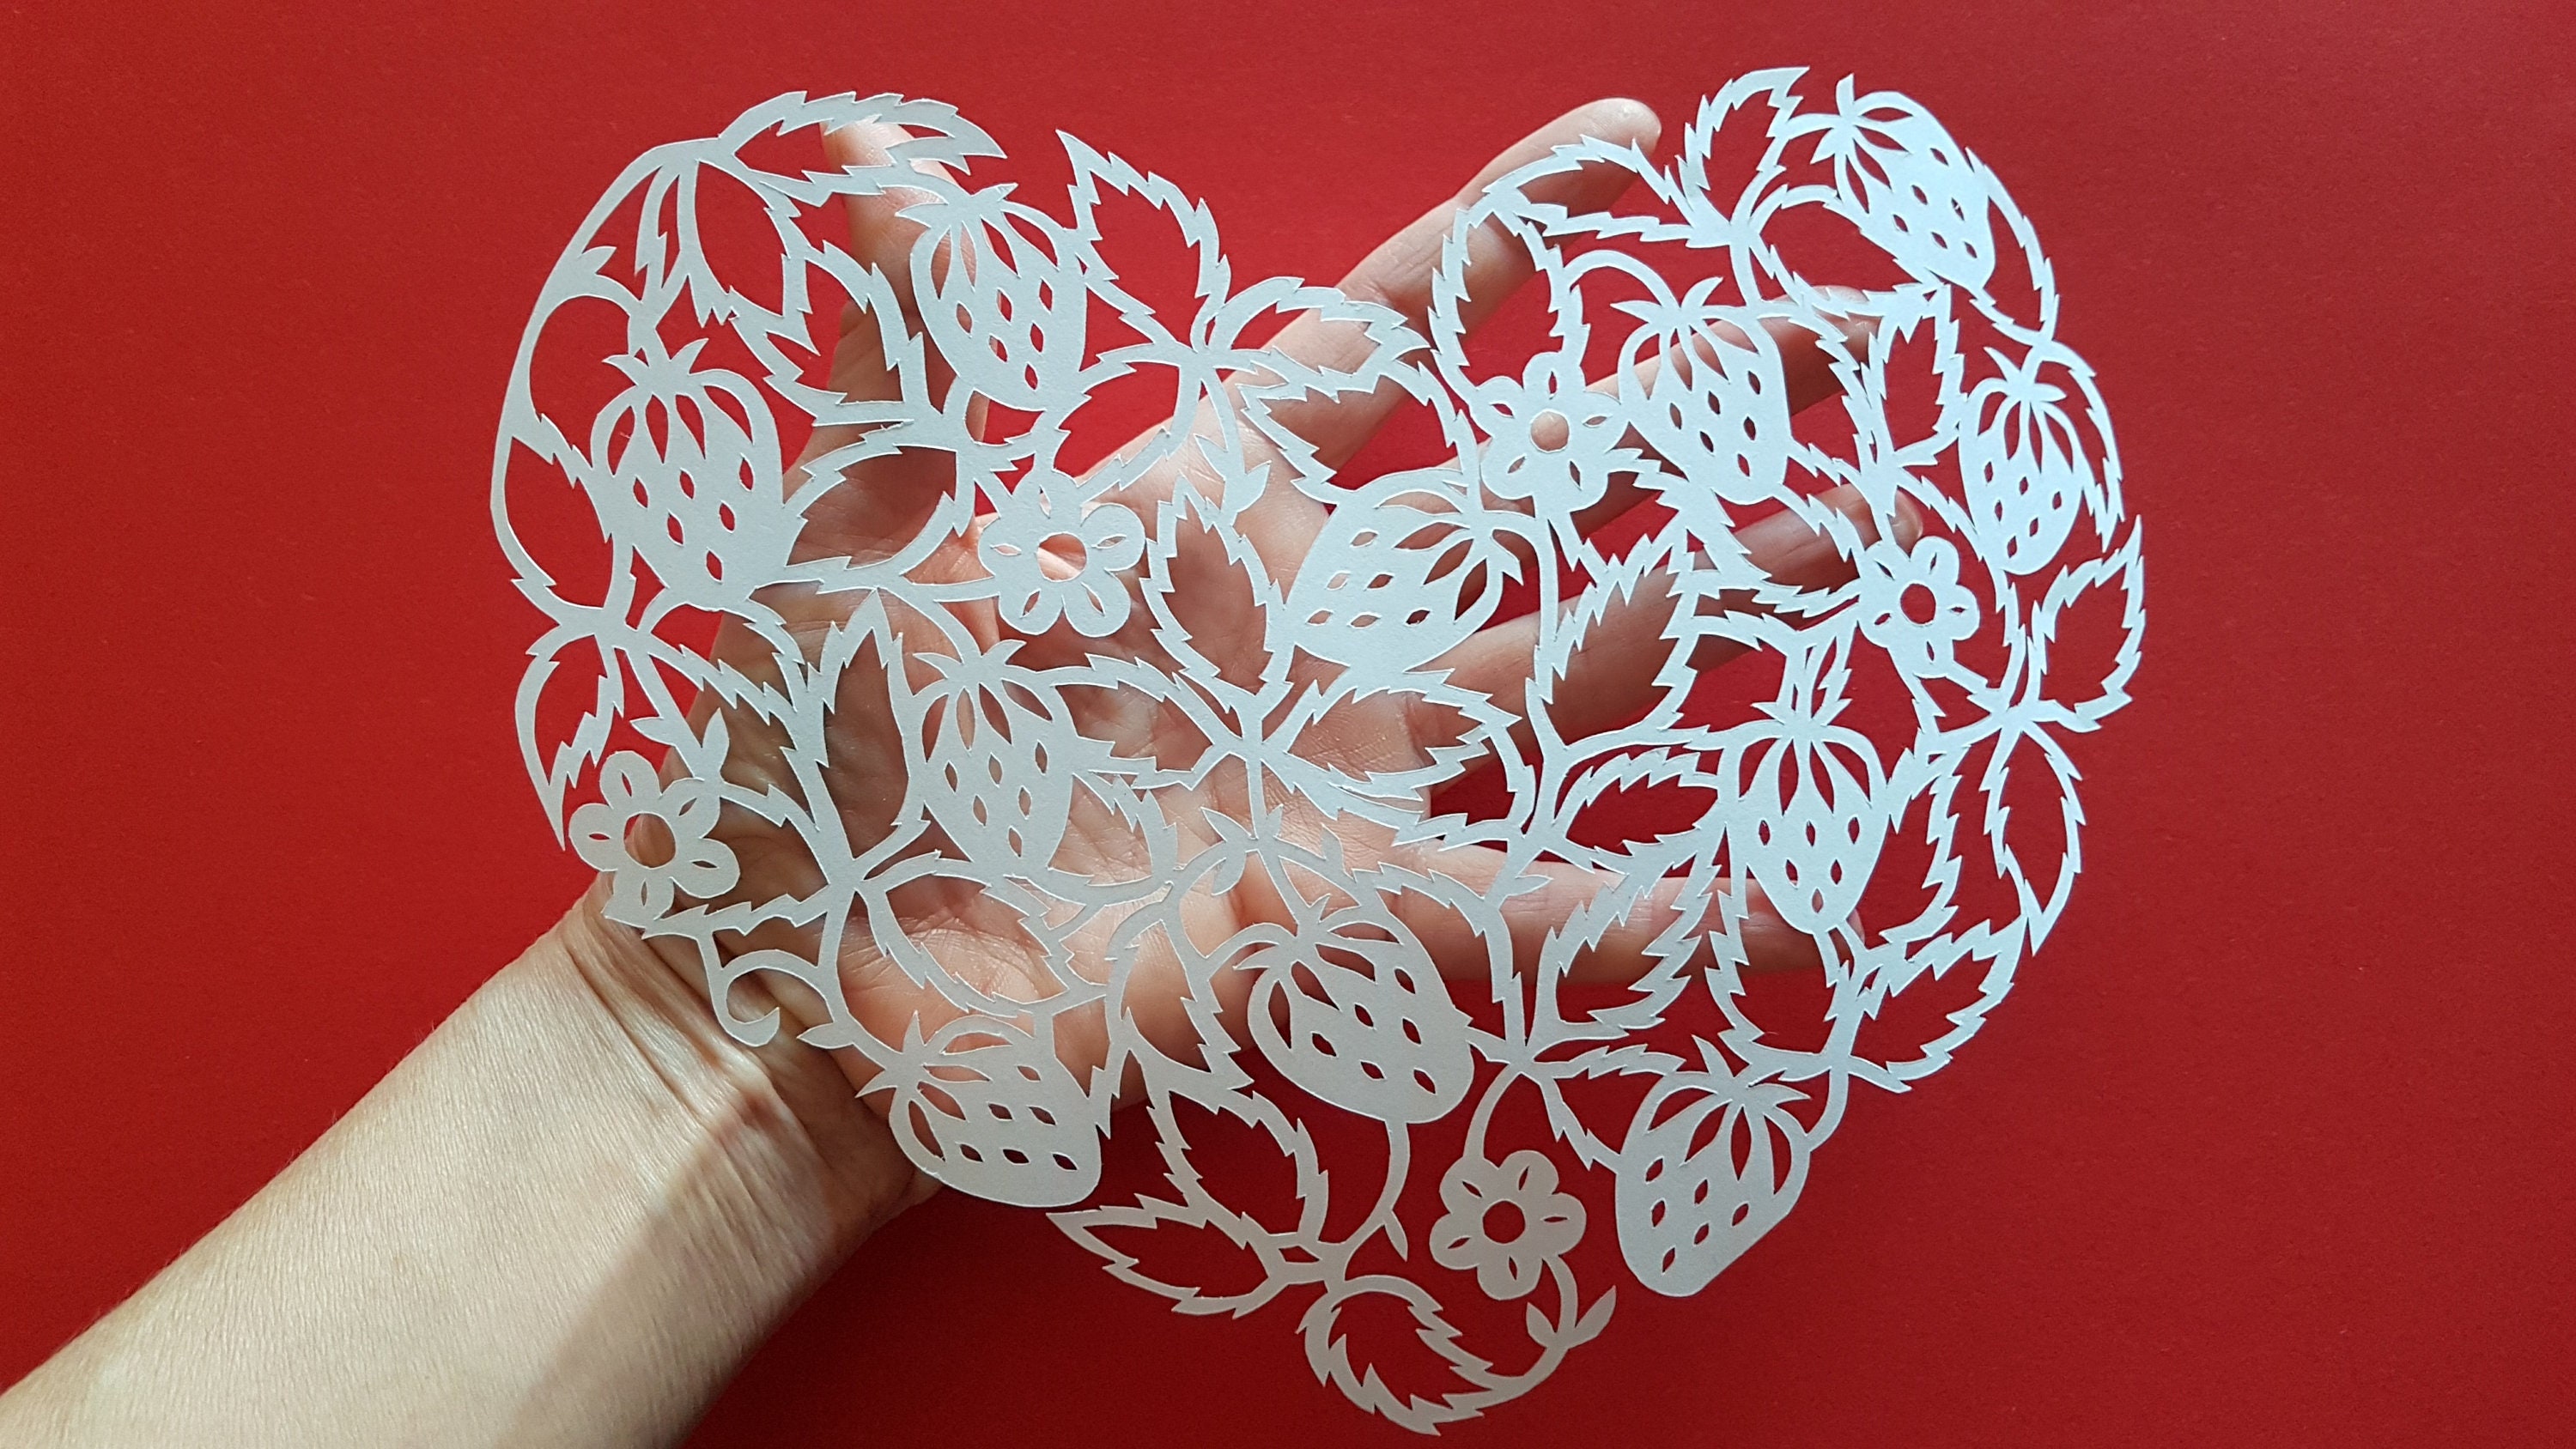 Heart Shaped Paper Cut Picture 